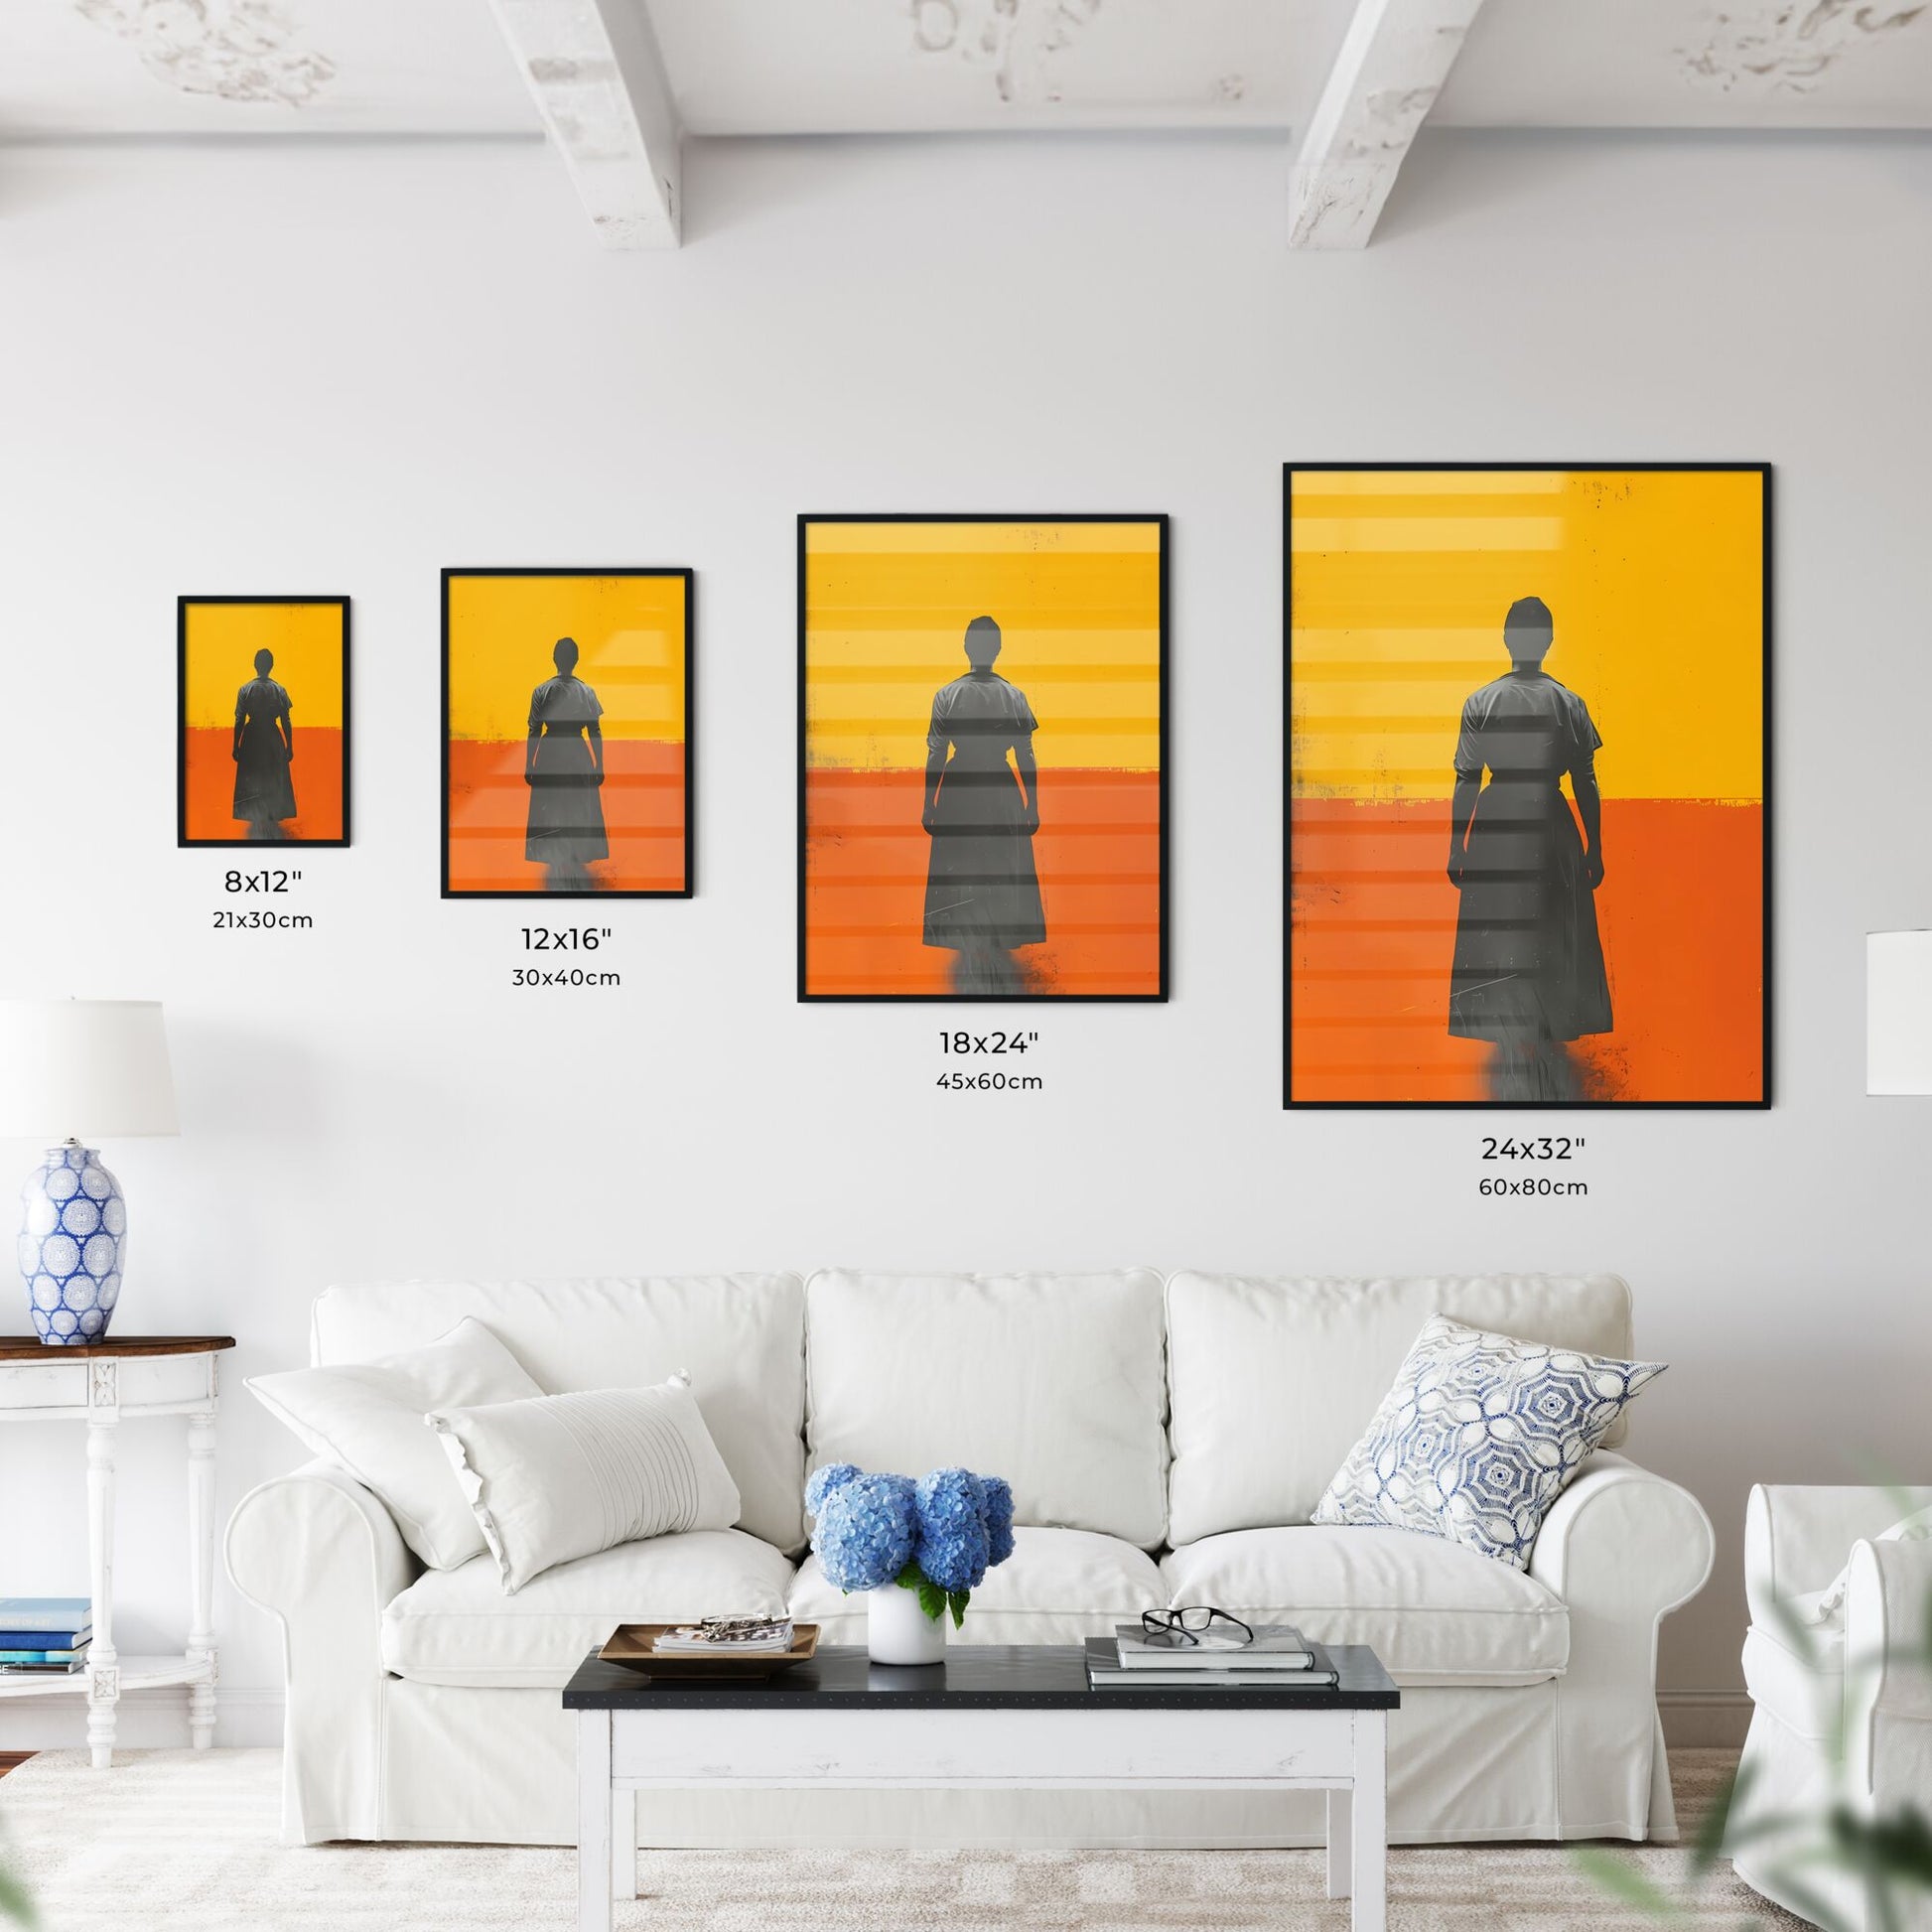 French maid - Art print of a person standing in front of a yellow and orange background Default Title